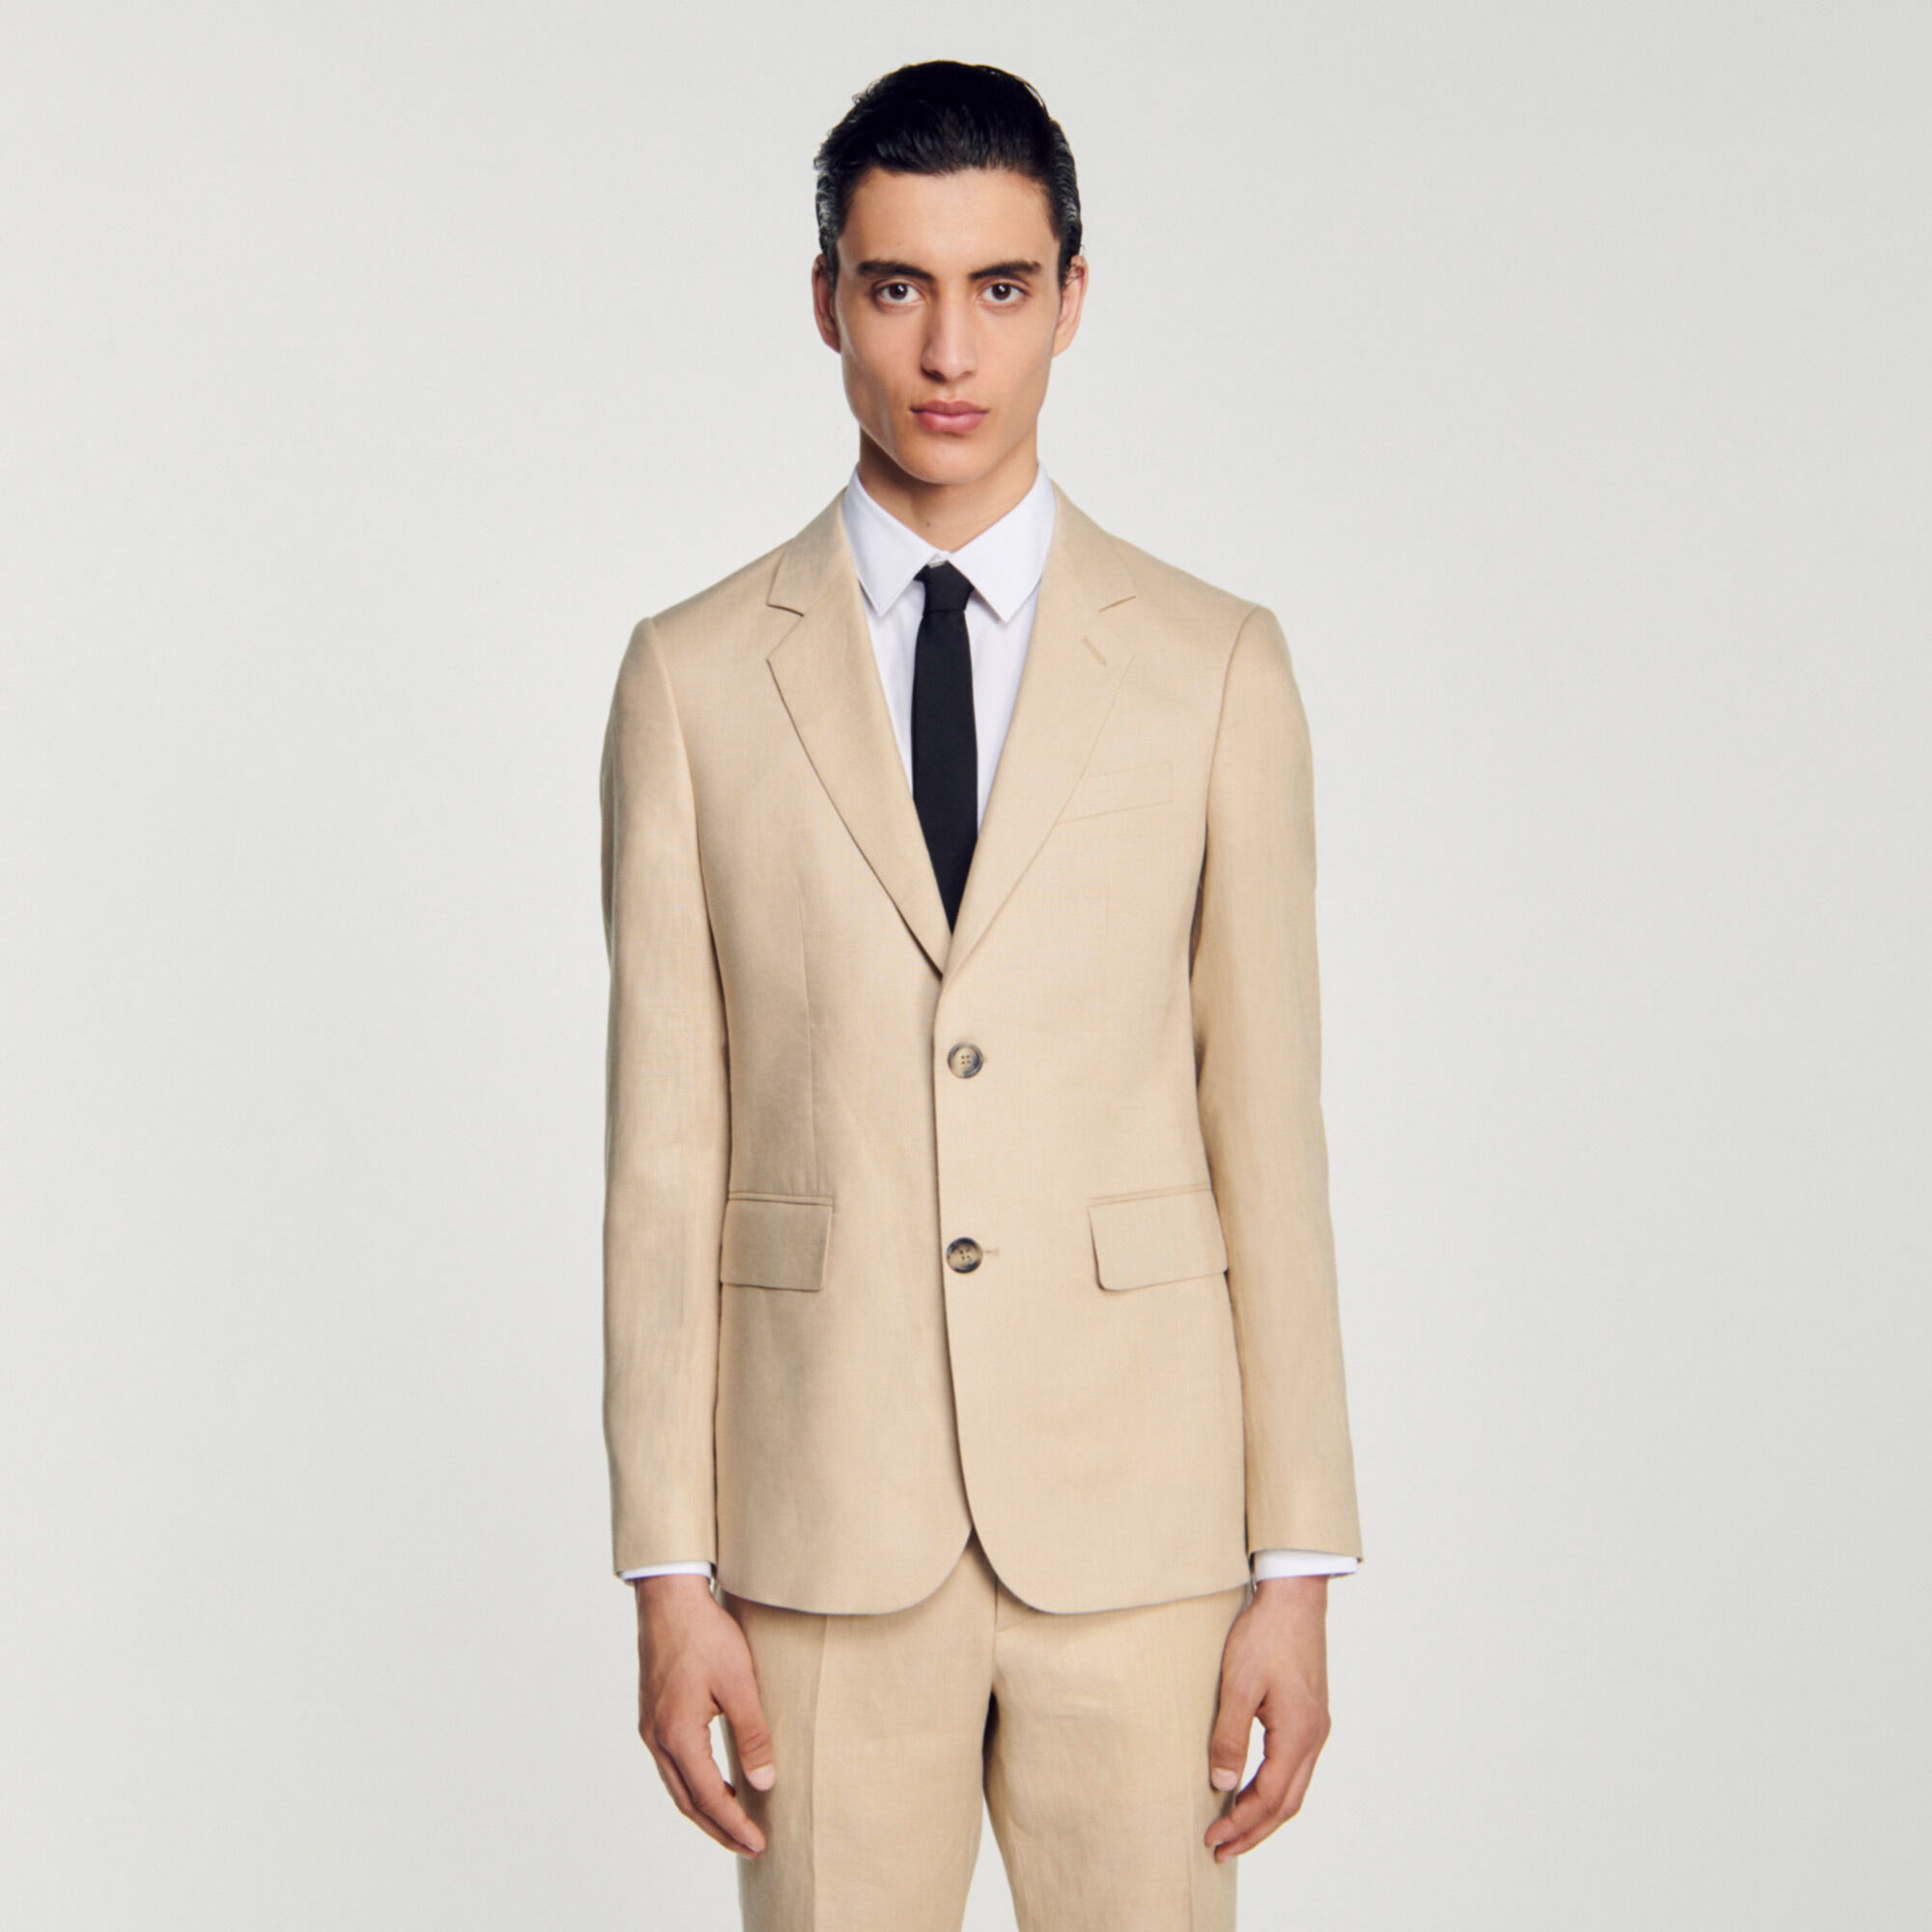 Buy United Colors of Benetton Men's Linen Jacket (17A2FSIC2024I901M_Tan_M)  at Amazon.in